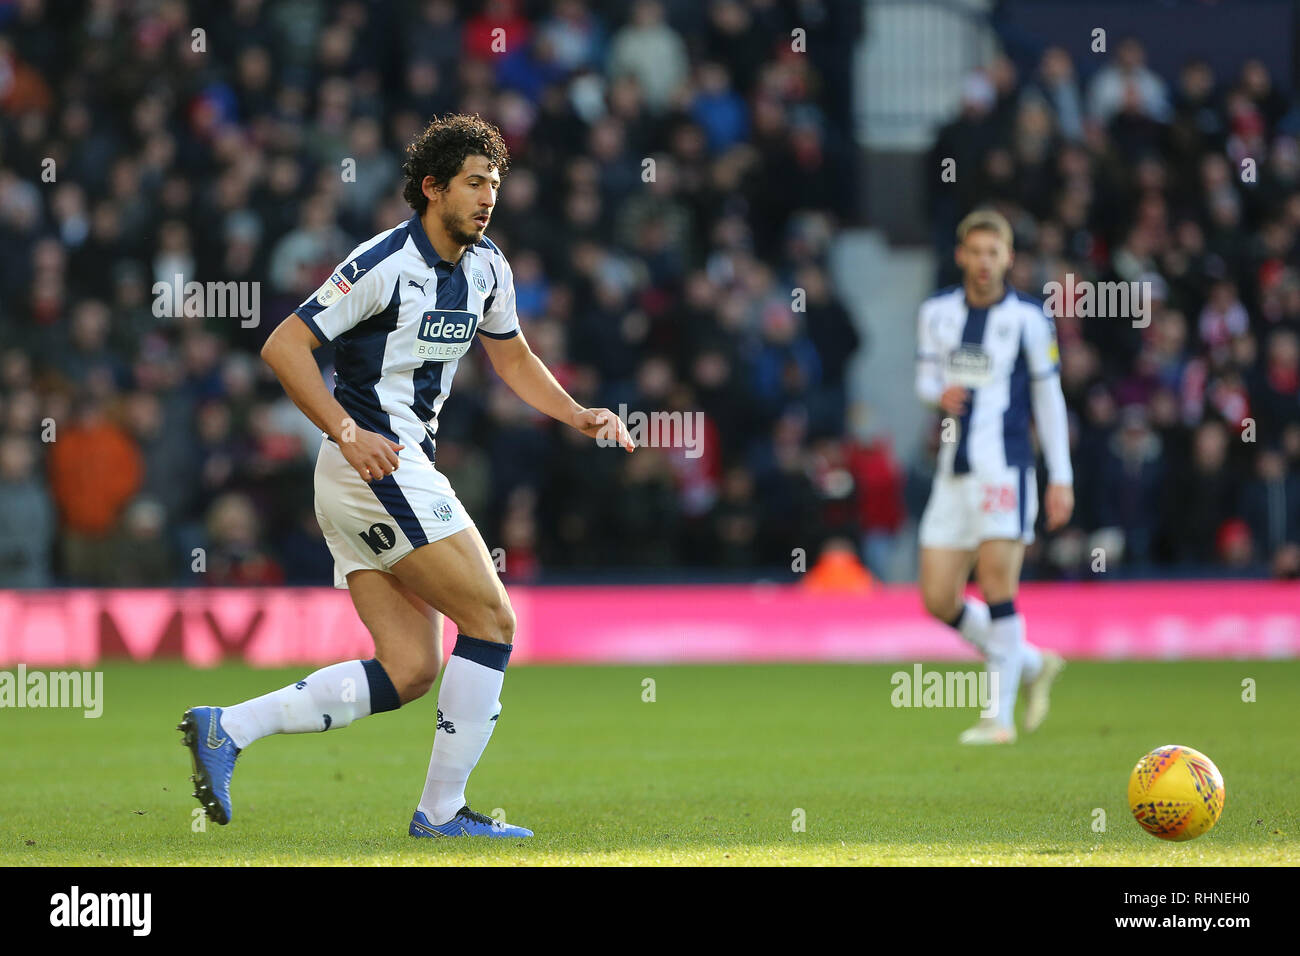 West Bromwich, UK. 2 February 2019.  Ahmed Hegazy of West Bromwich Albion during the Sky Bet Championship match between West Bromwich Albion and Middlesbrough at The Hawthorns, West Bromwich on Saturday 2nd February 2019.  (MI News | Alamy) Credit: MI News & Sport /Alamy Live News Stock Photo